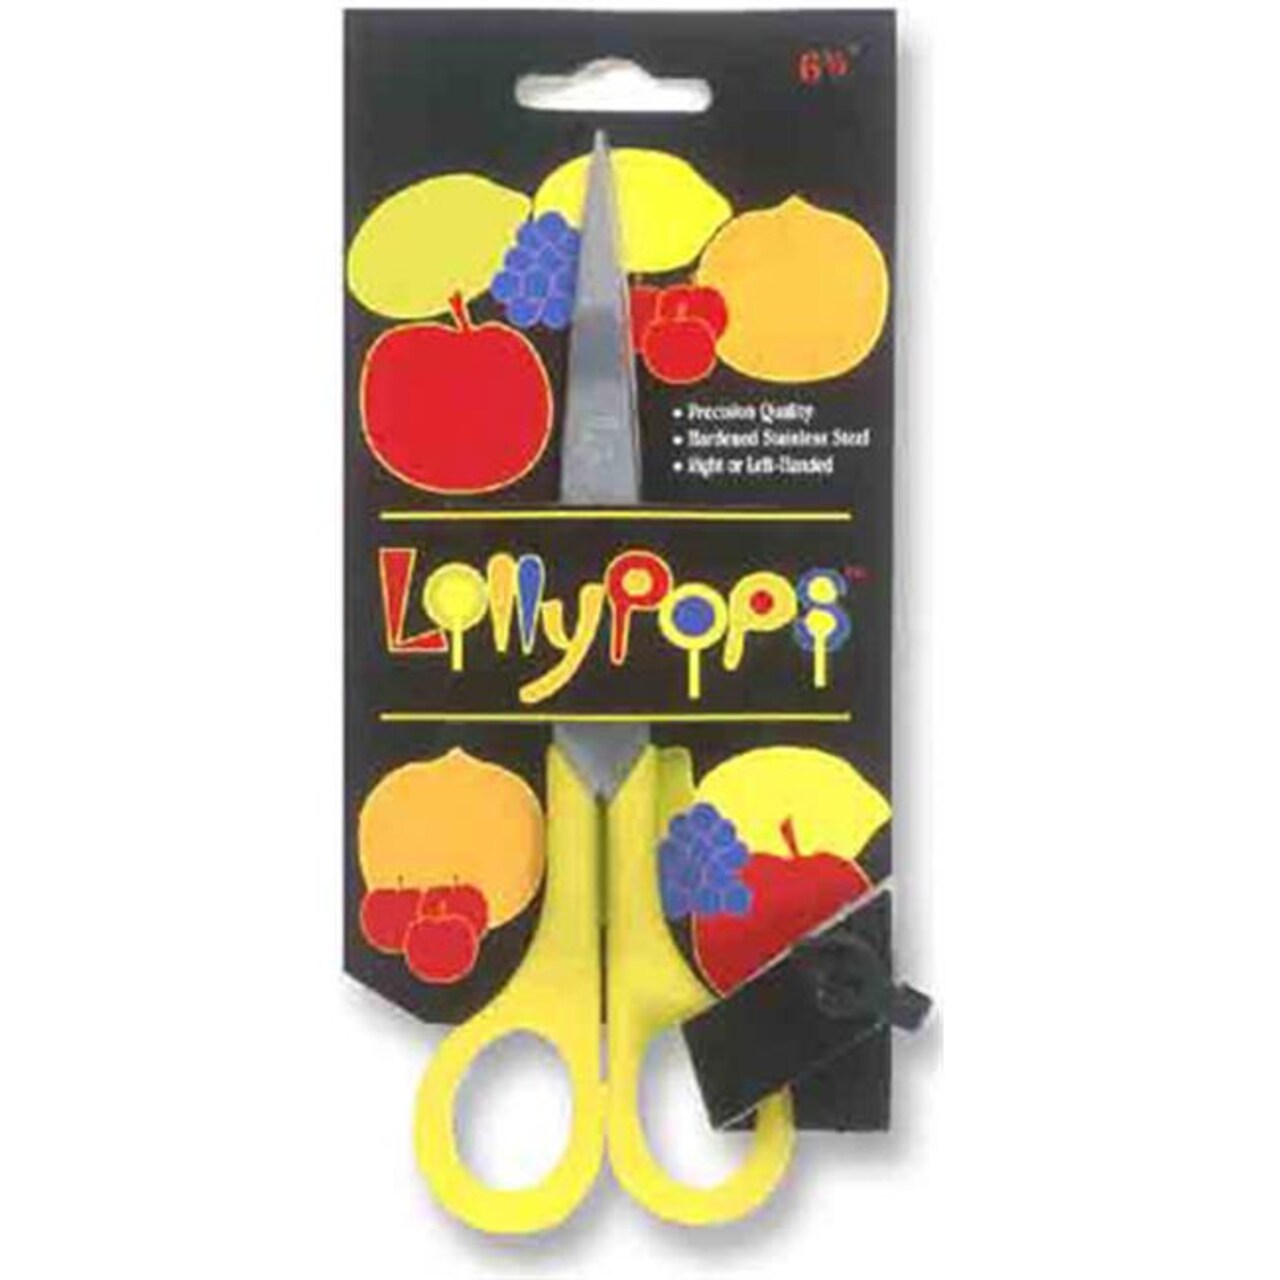 Armada Art 2201c Lollypops 7 in. Left/Right-Handed Scissors Carded  - Pack of 12